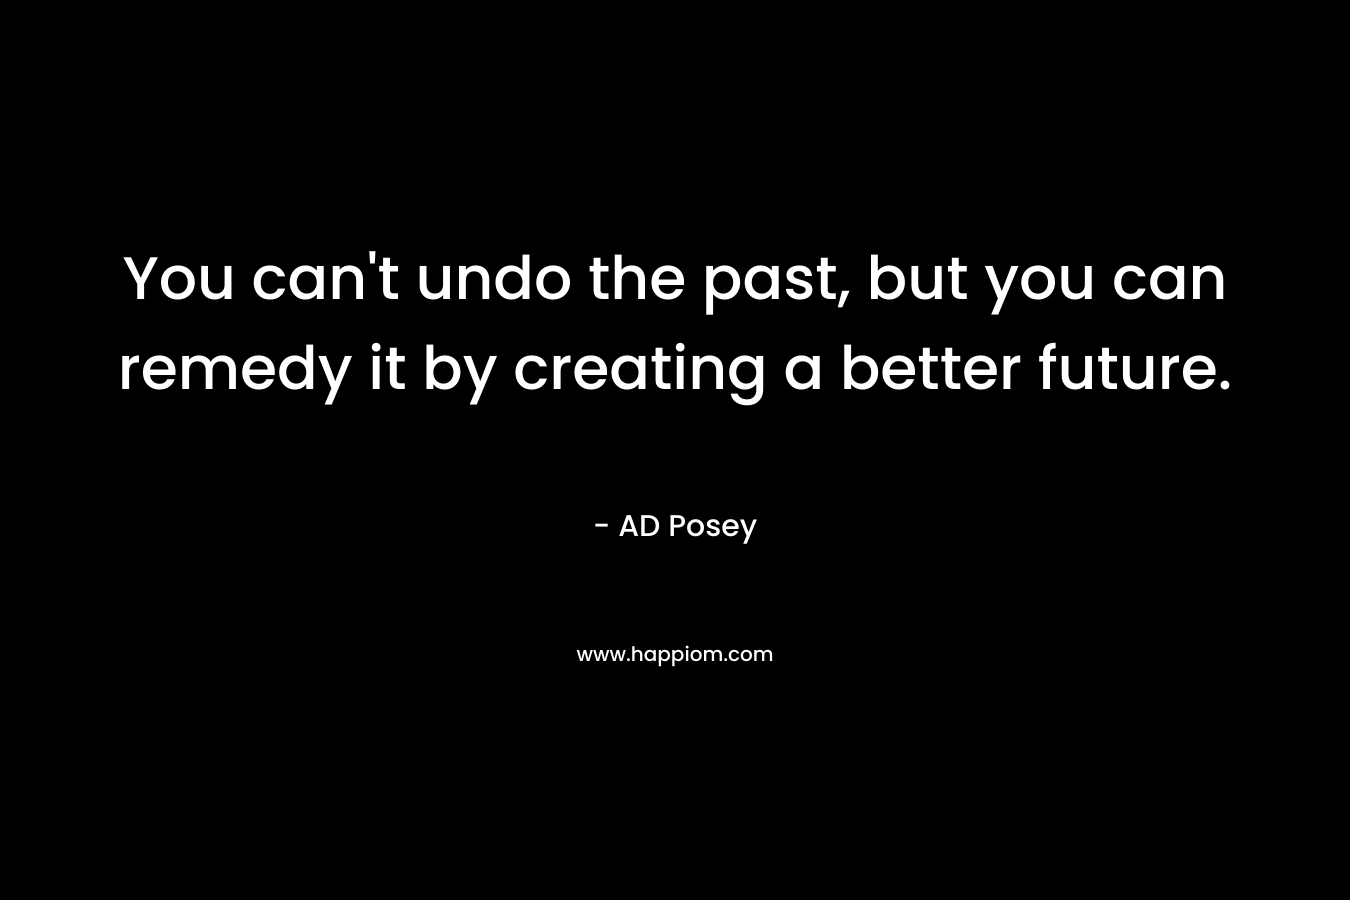 You can't undo the past, but you can remedy it by creating a better future.